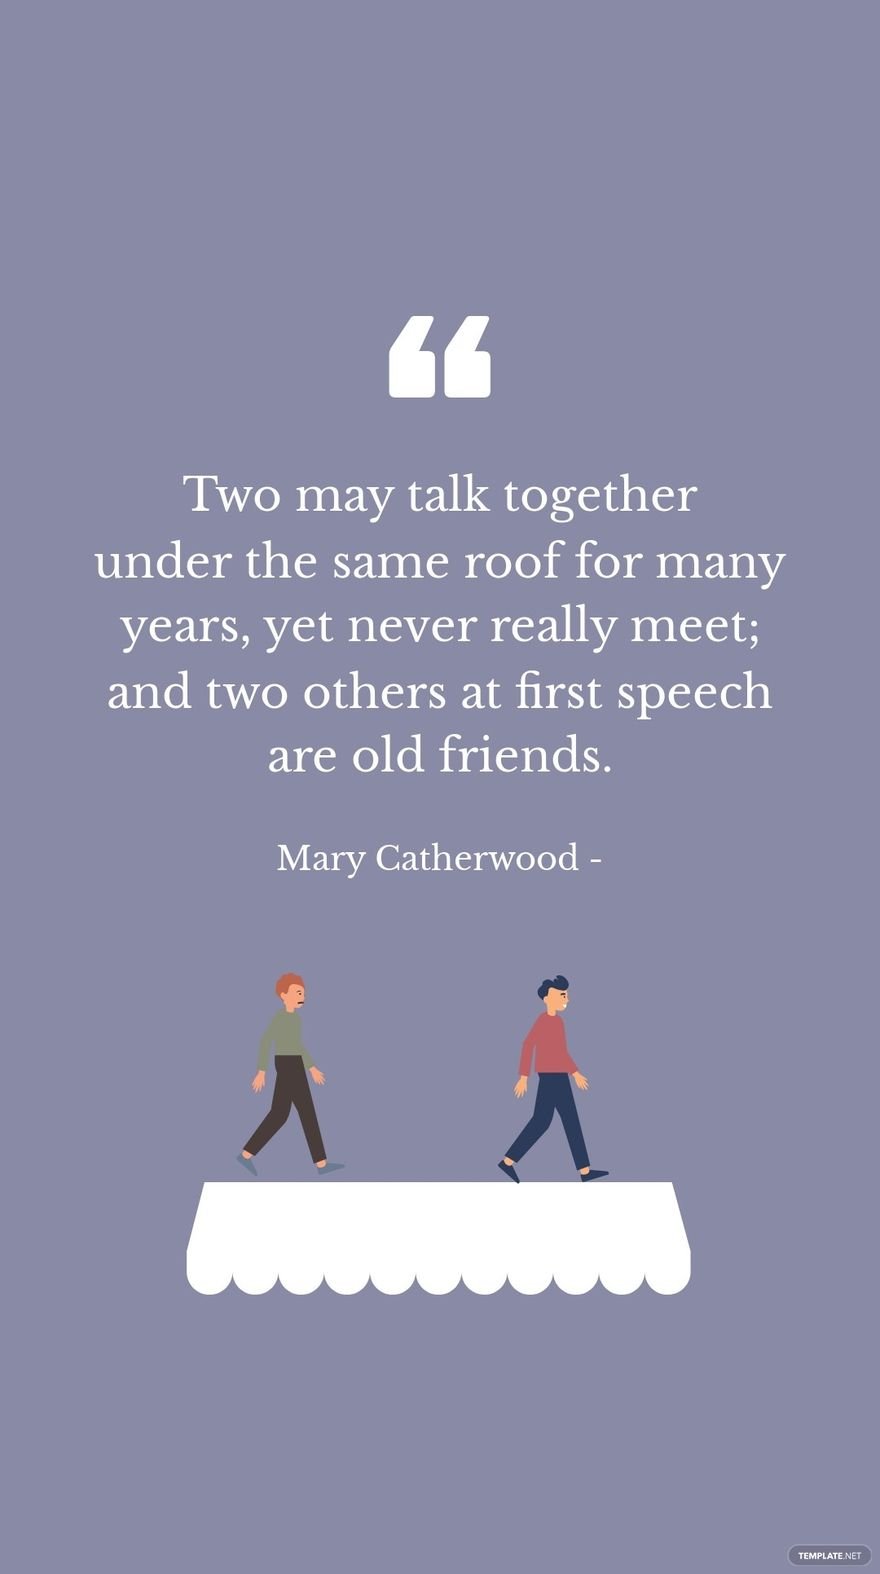 Mary Catherwood - Two may talk together under the same roof for many years, yet never really meet; and two others at first speech are old friends.